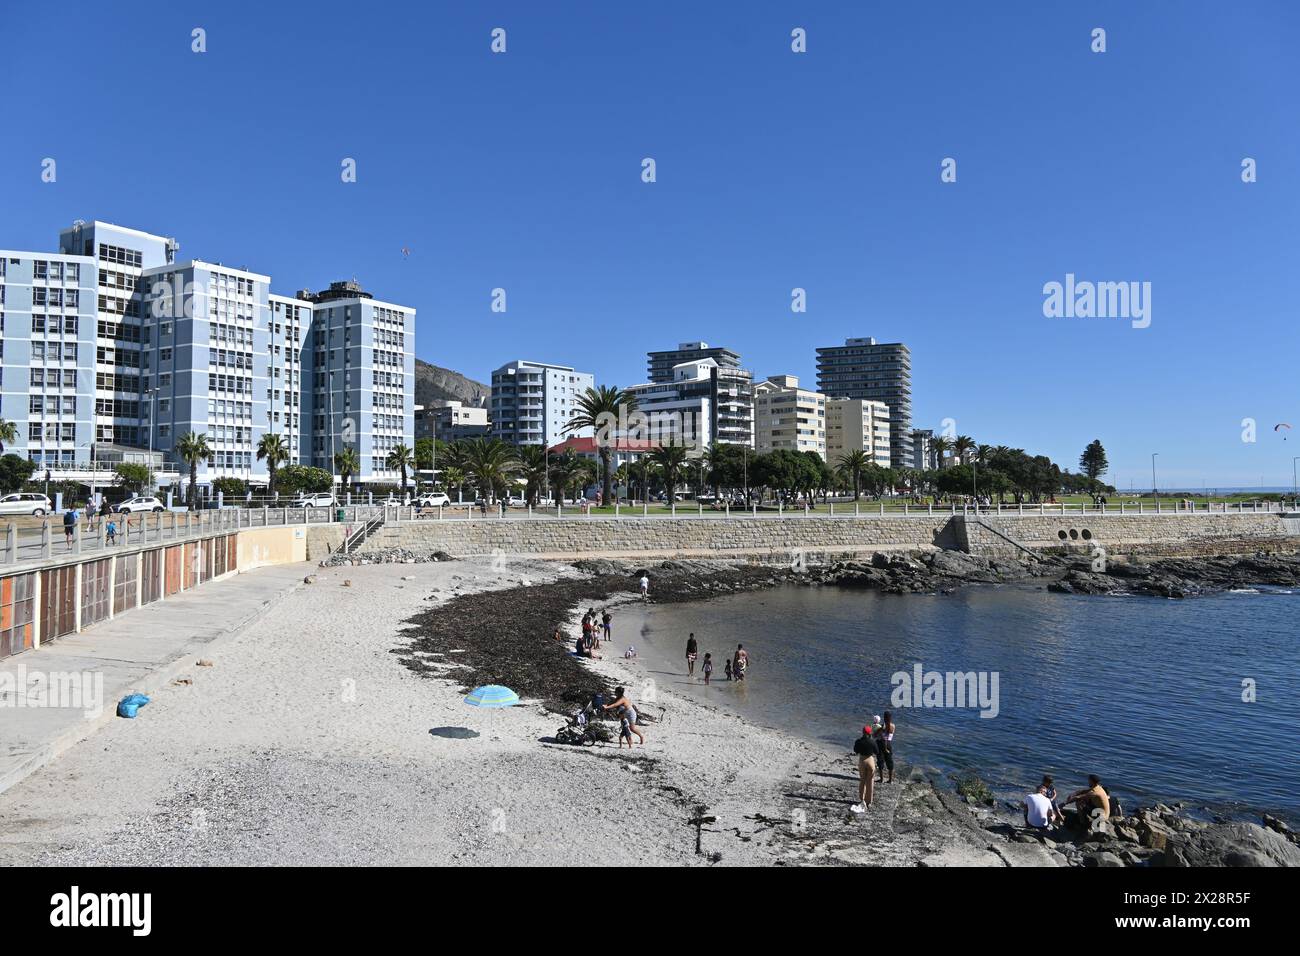 View of Sea Point waterfront, a neighbourhood situated between Signal Hill and the Atlantic Ocean in Cape Town, South Africa Stock Photo